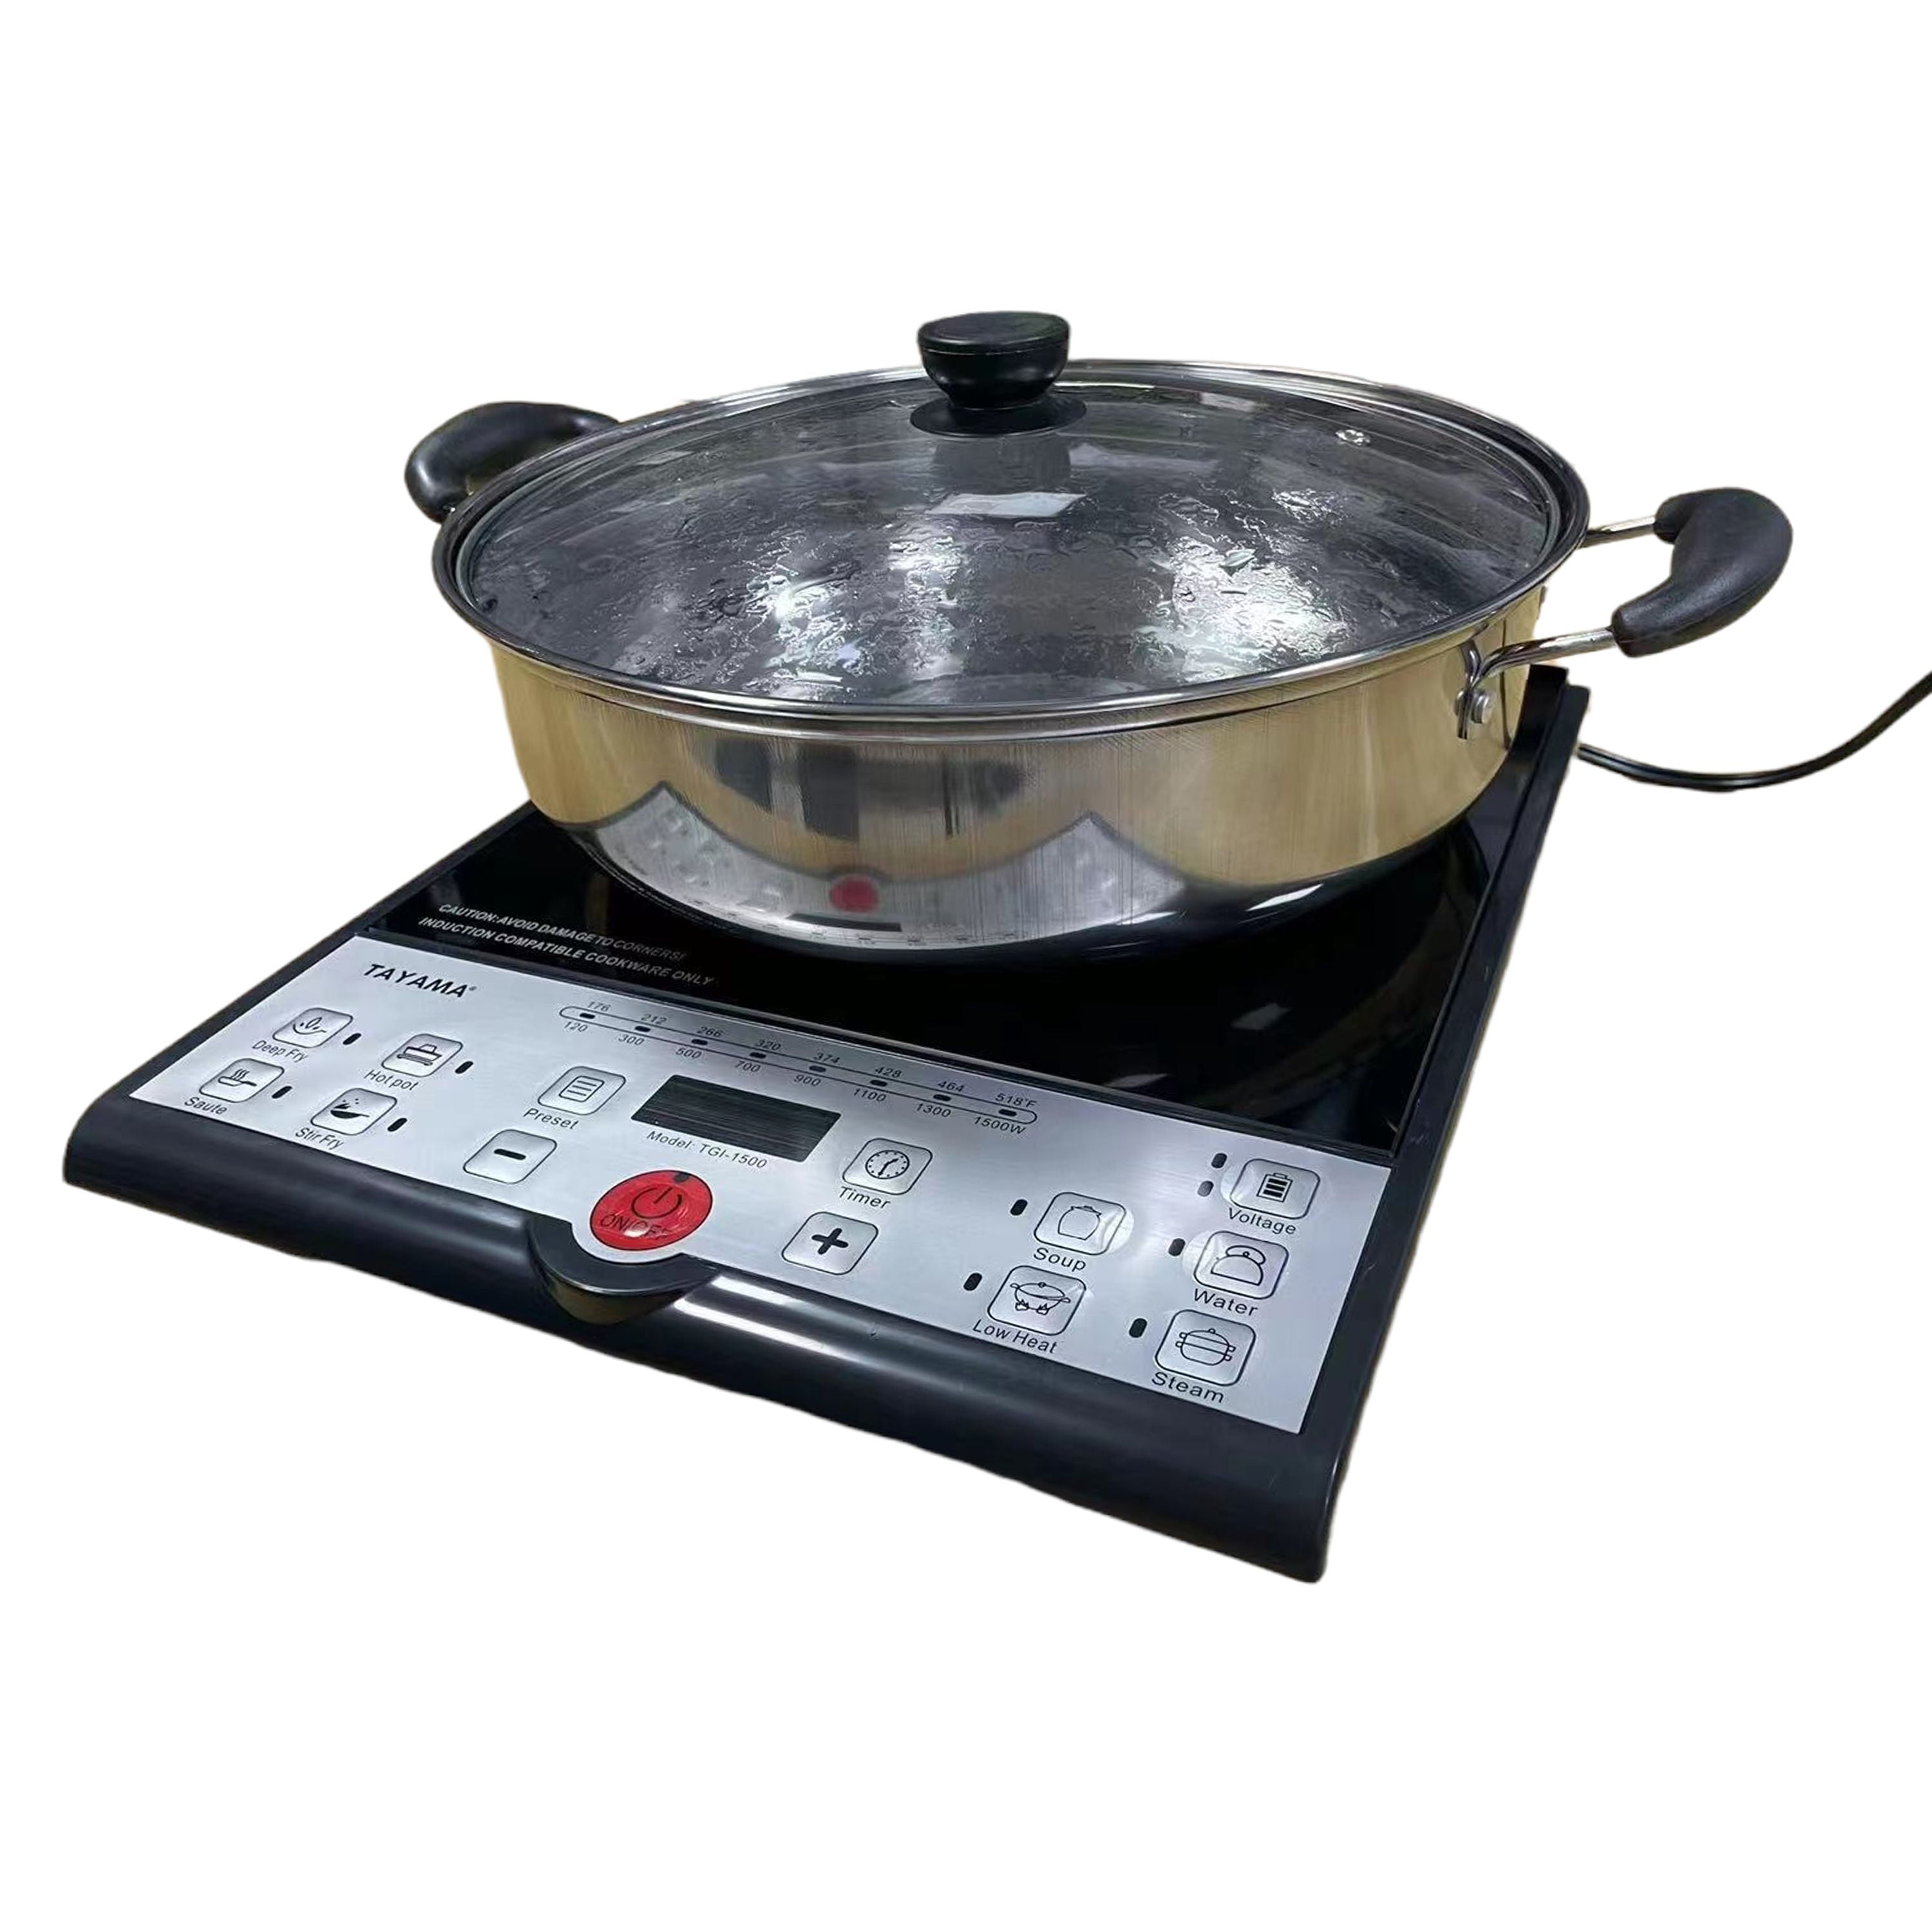 CENHOT Built-in Round Induction Stove For Hot Pot 800W Manufacturers